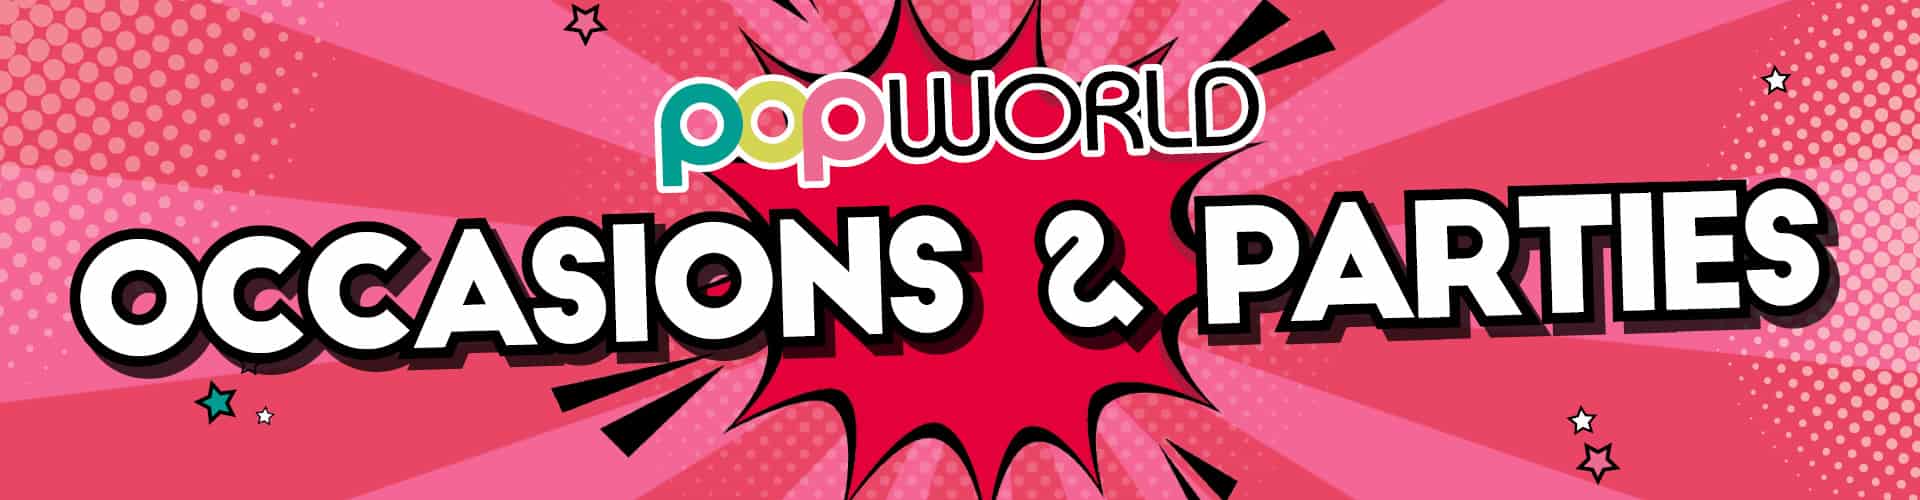 Occasions and Parties at Popworld